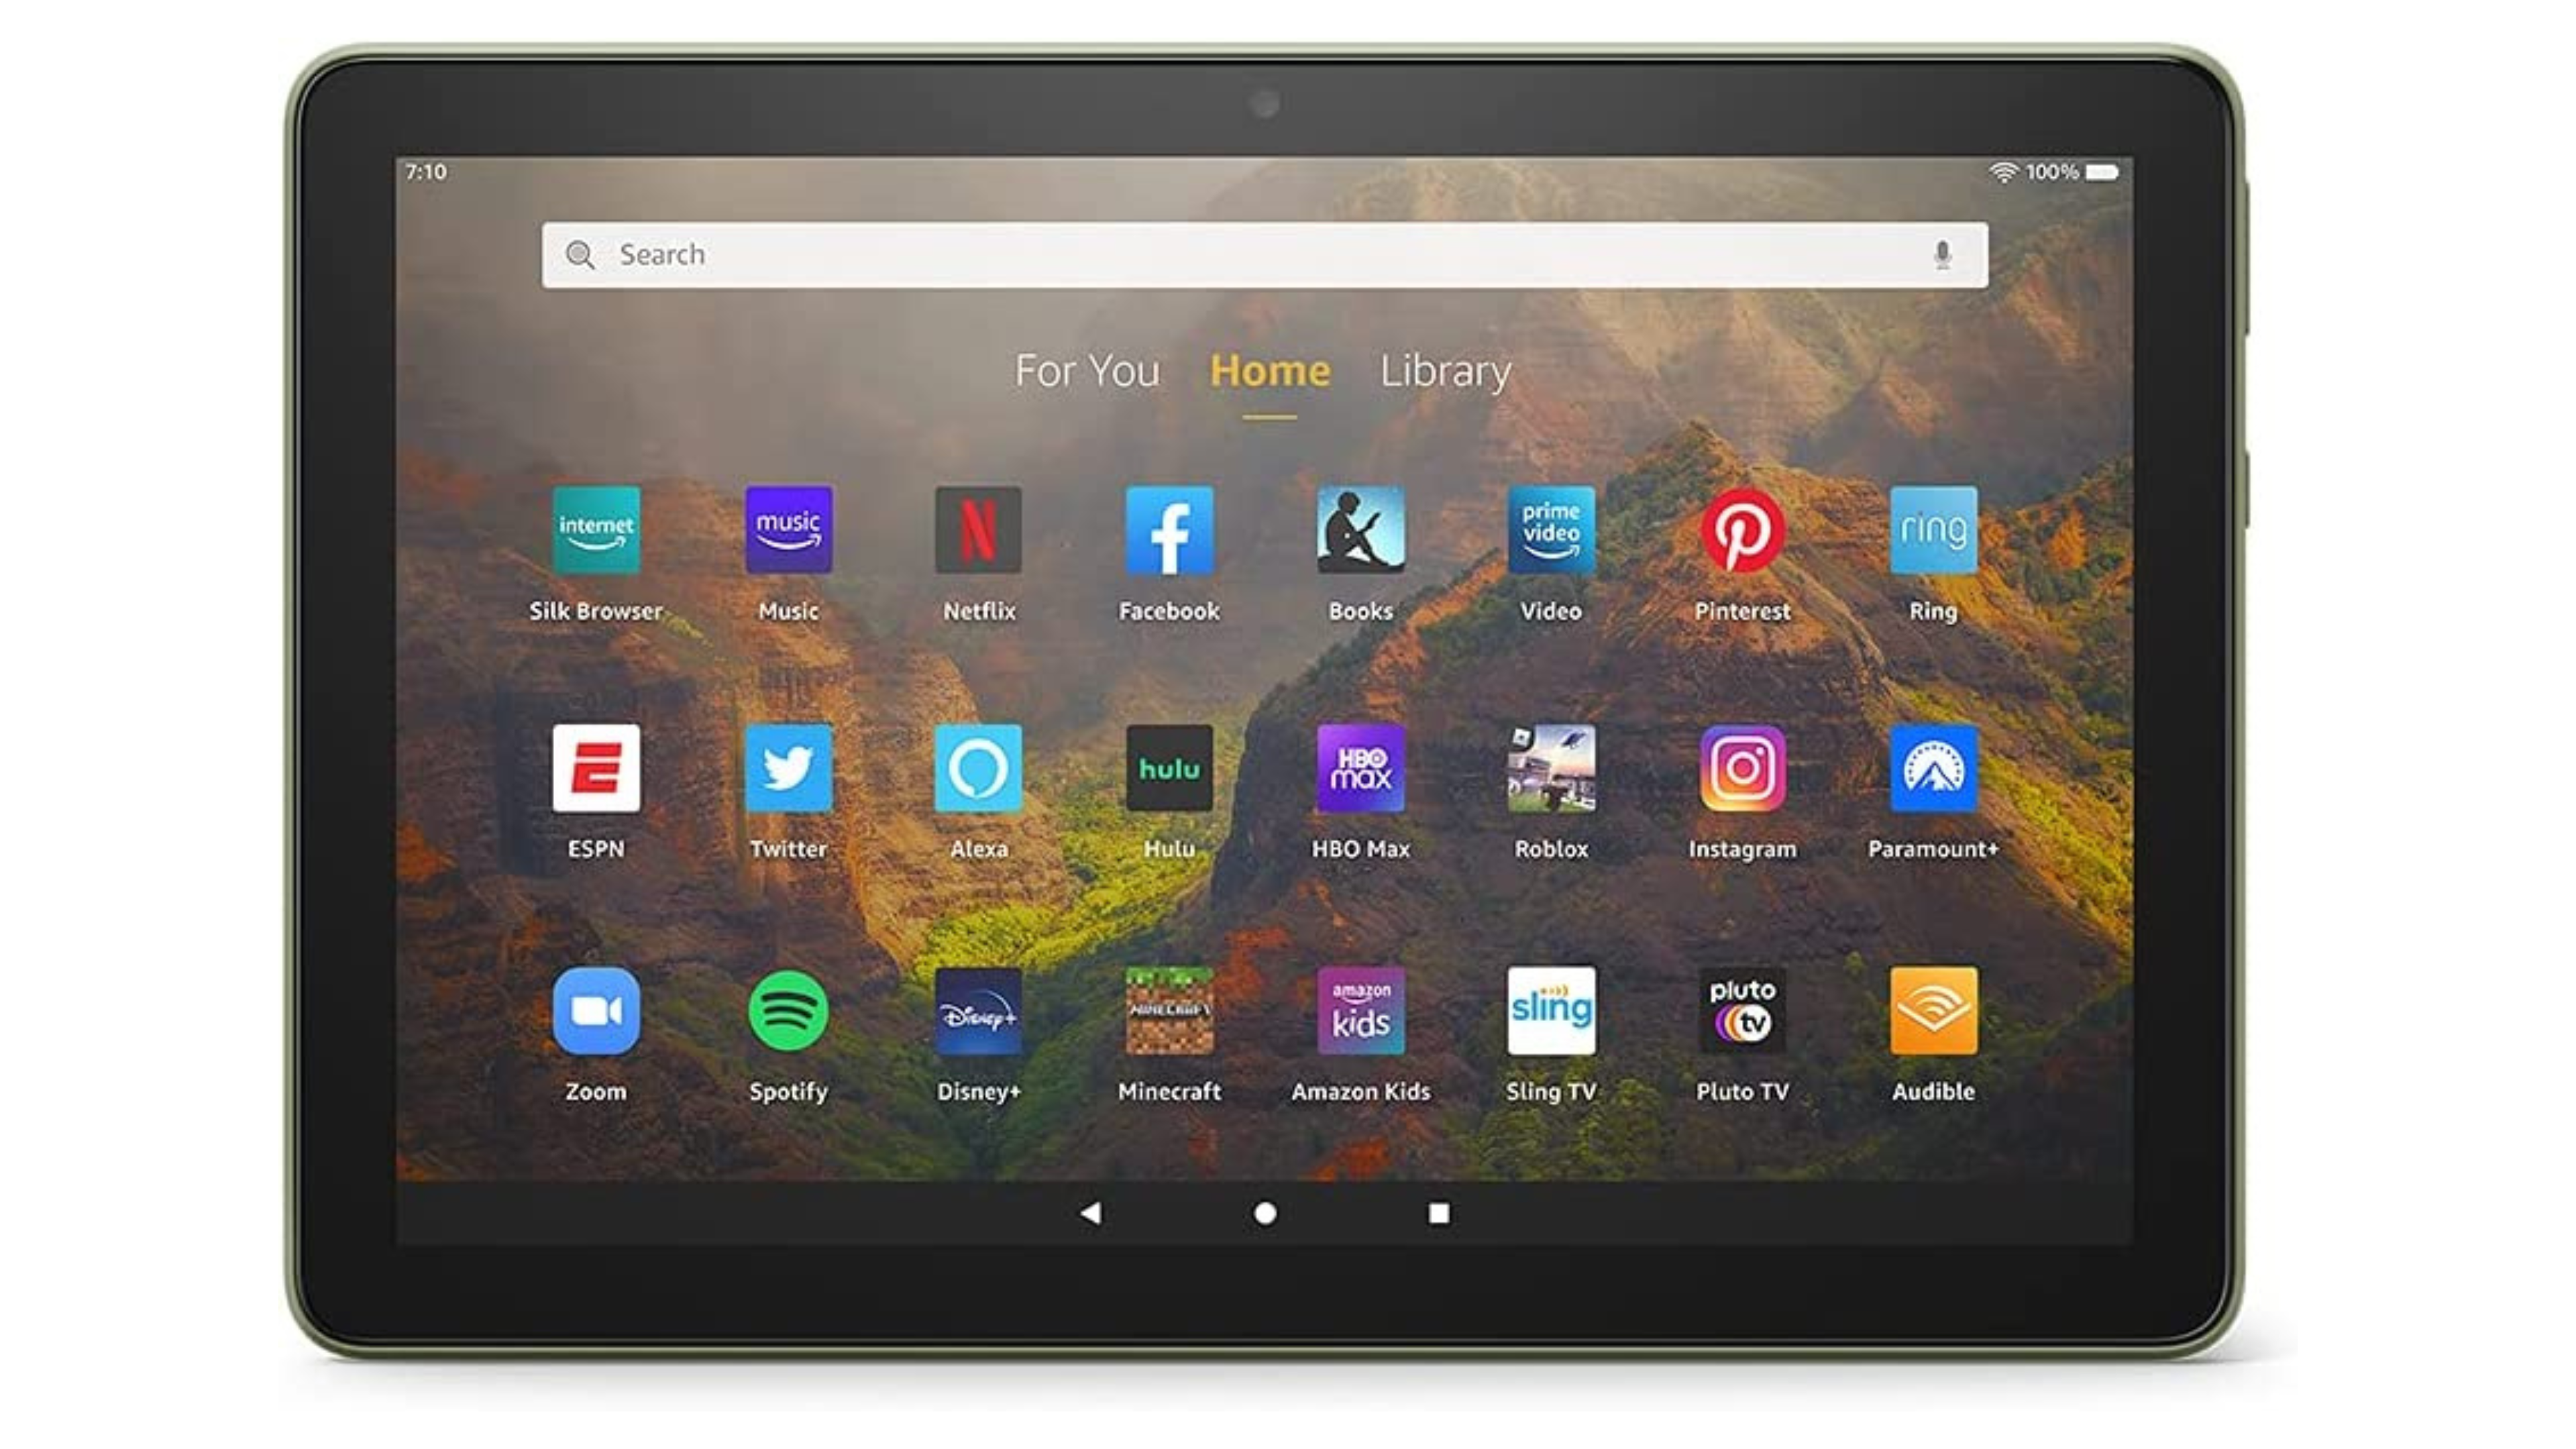 Amazon's Fire HD 10 tablet is now even more affordable in this limited-time deal that takes 43% off